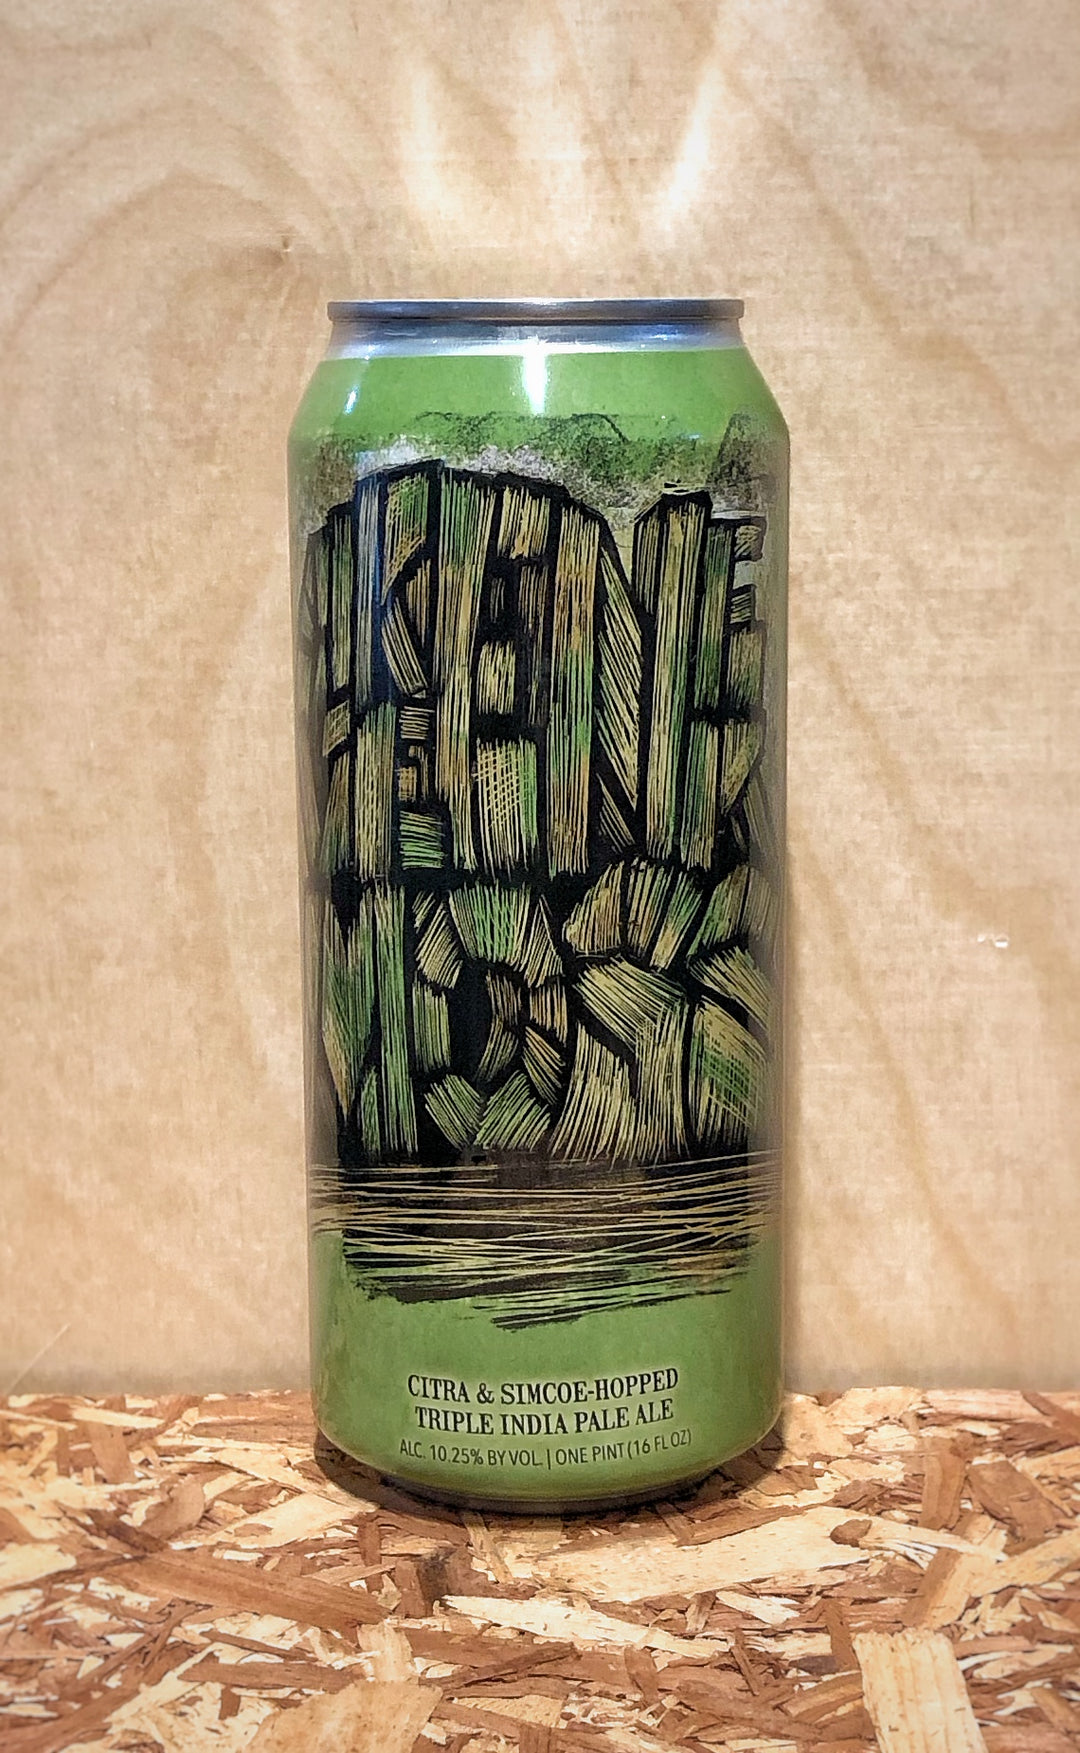 Hop Butcher For the World 'Greener Moss' Citra & Simcoe-Hopped Triple IPA (Chicago, IL)